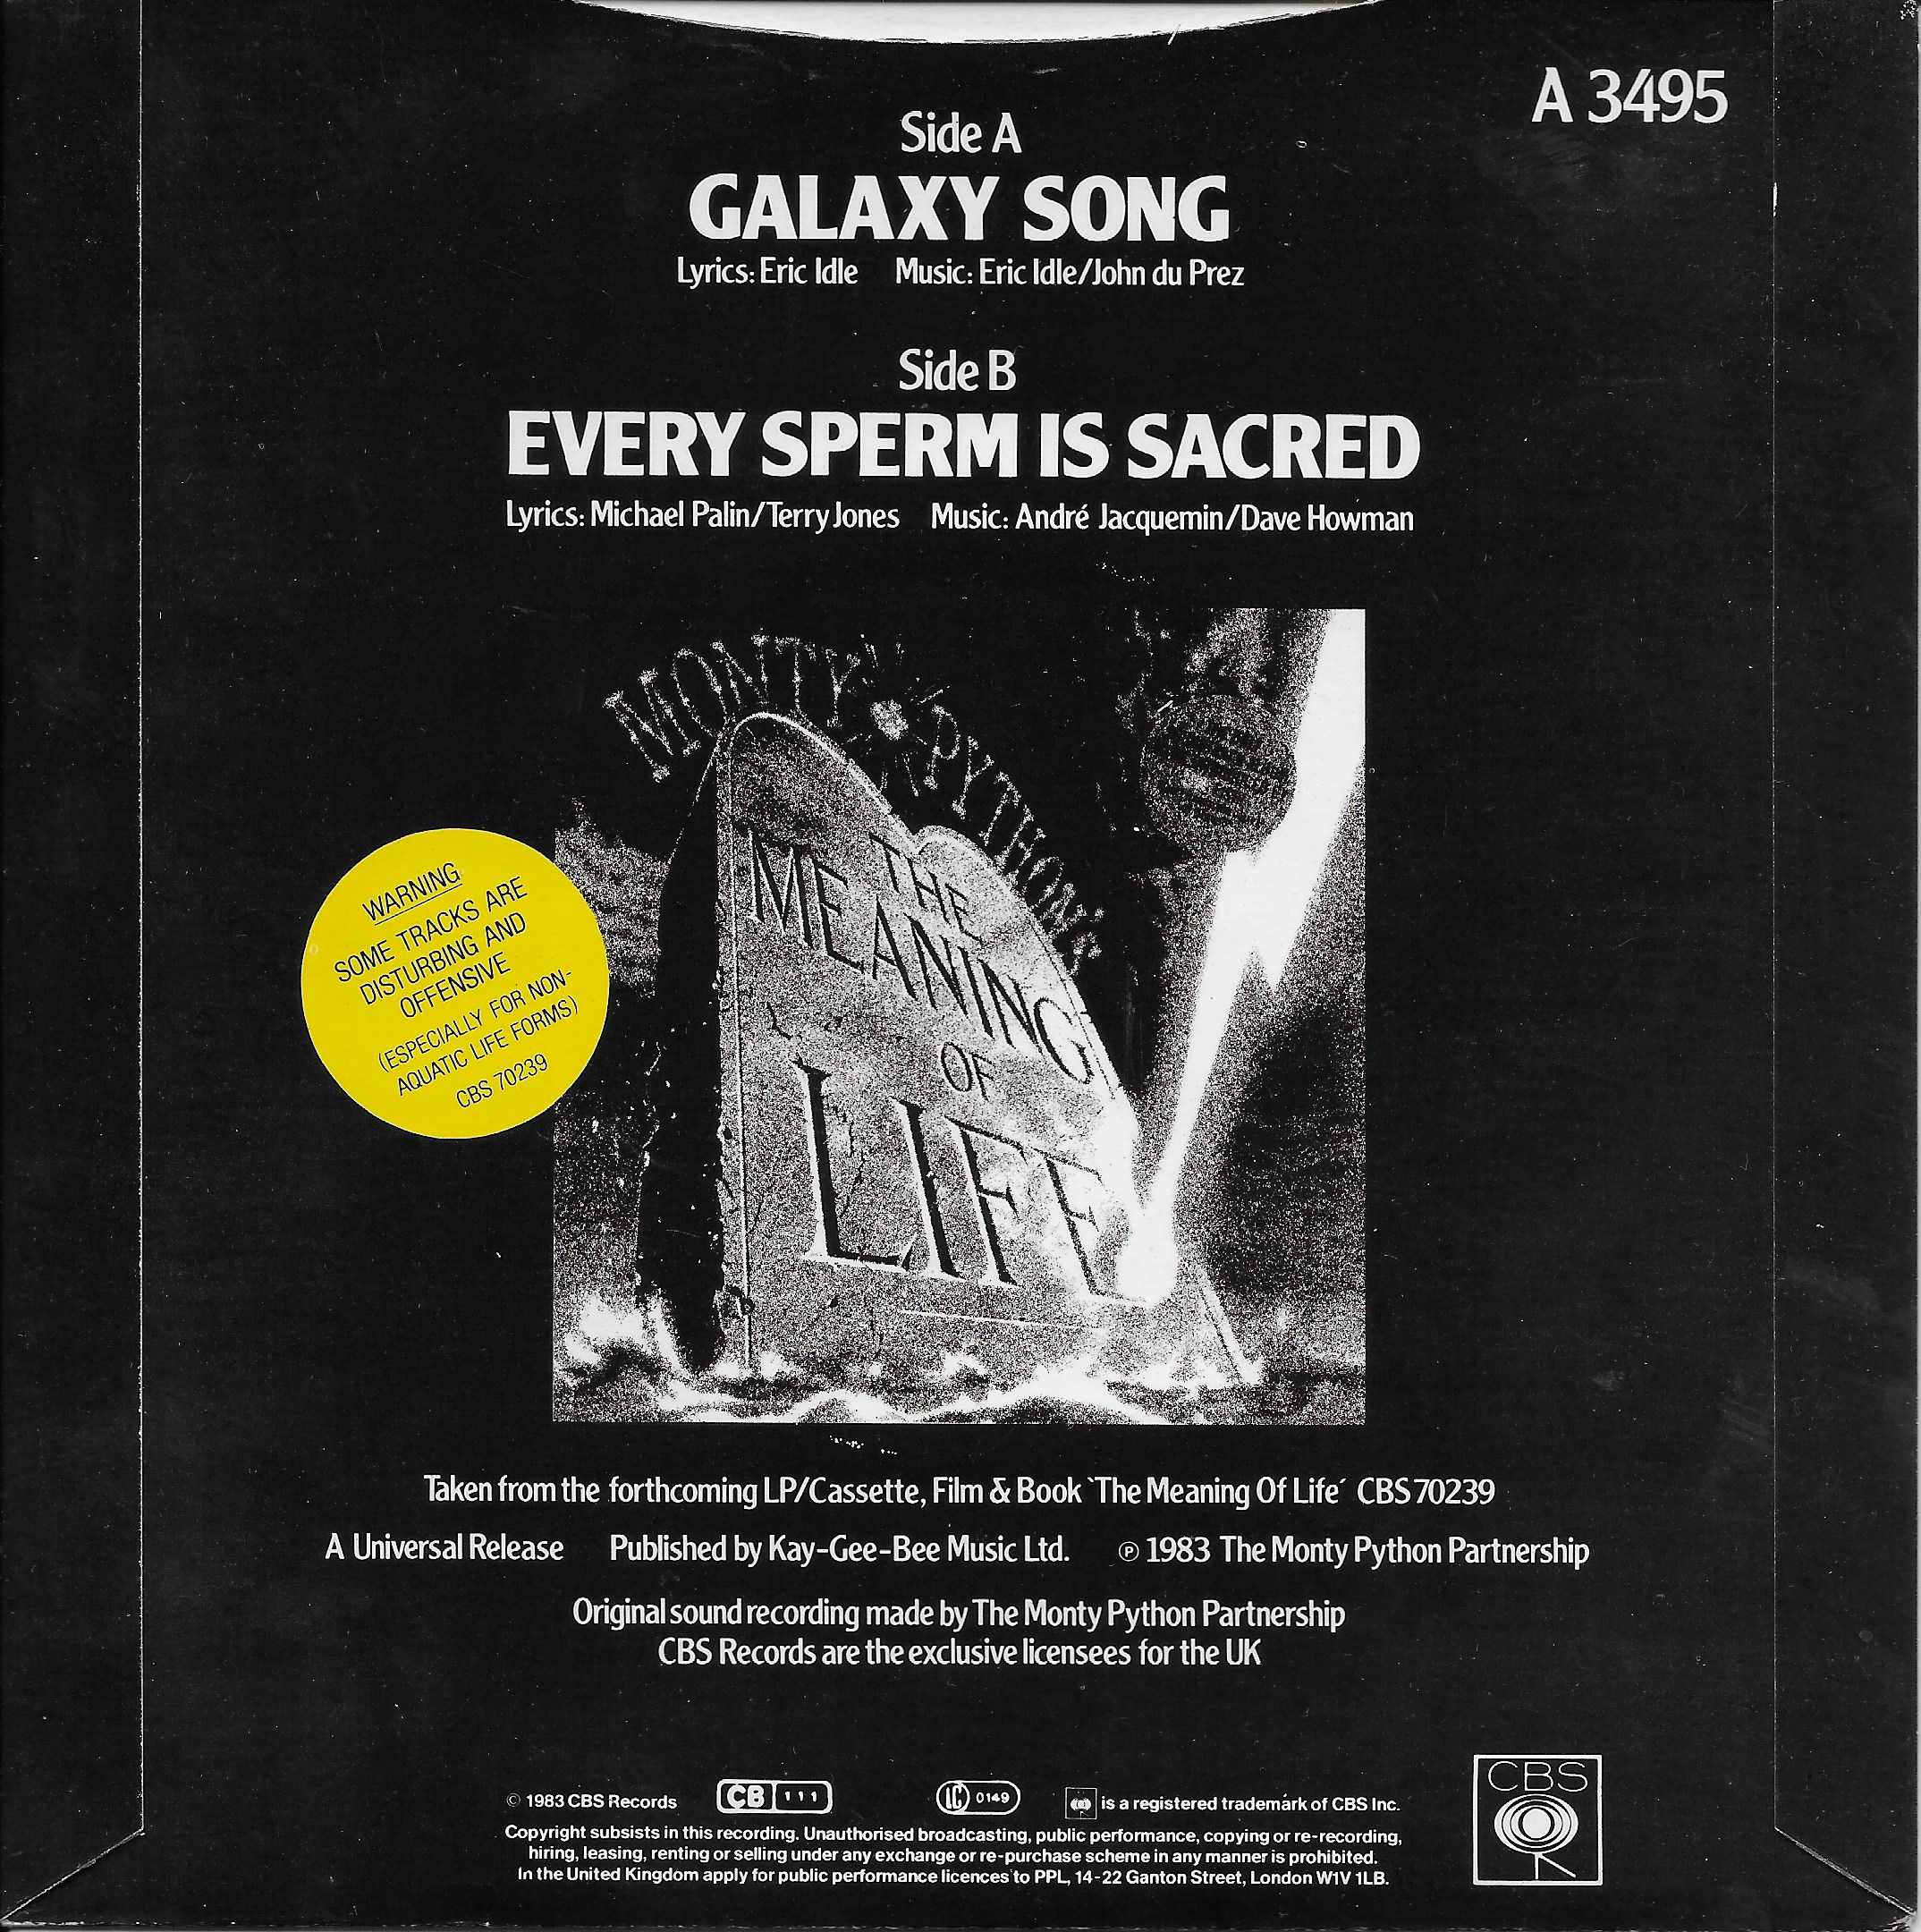 Picture of A 3495 Galaxy song (Monty Python's flying circus) by artist Monty Python from the BBC records and Tapes library